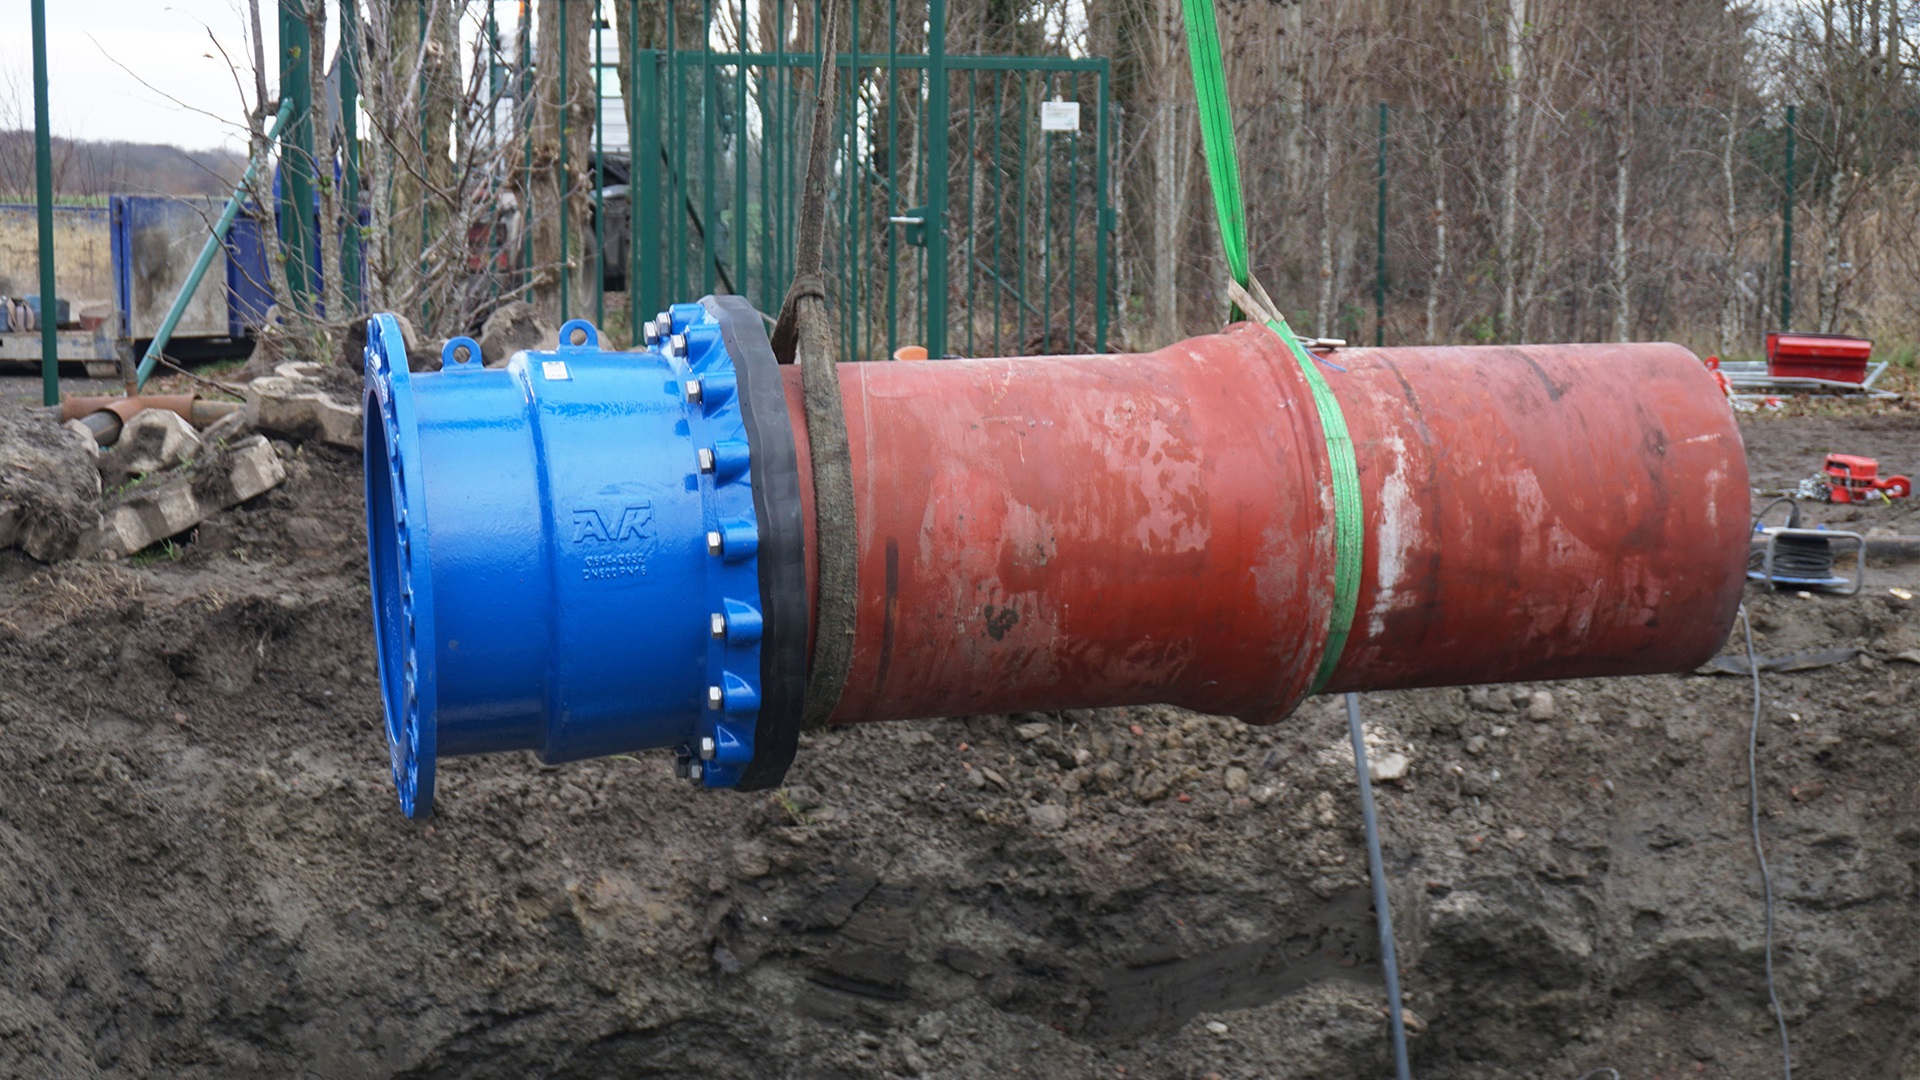 AVK Supa Maxi™ flange adaptor DN600 being installed at wastewater station in Belgium 